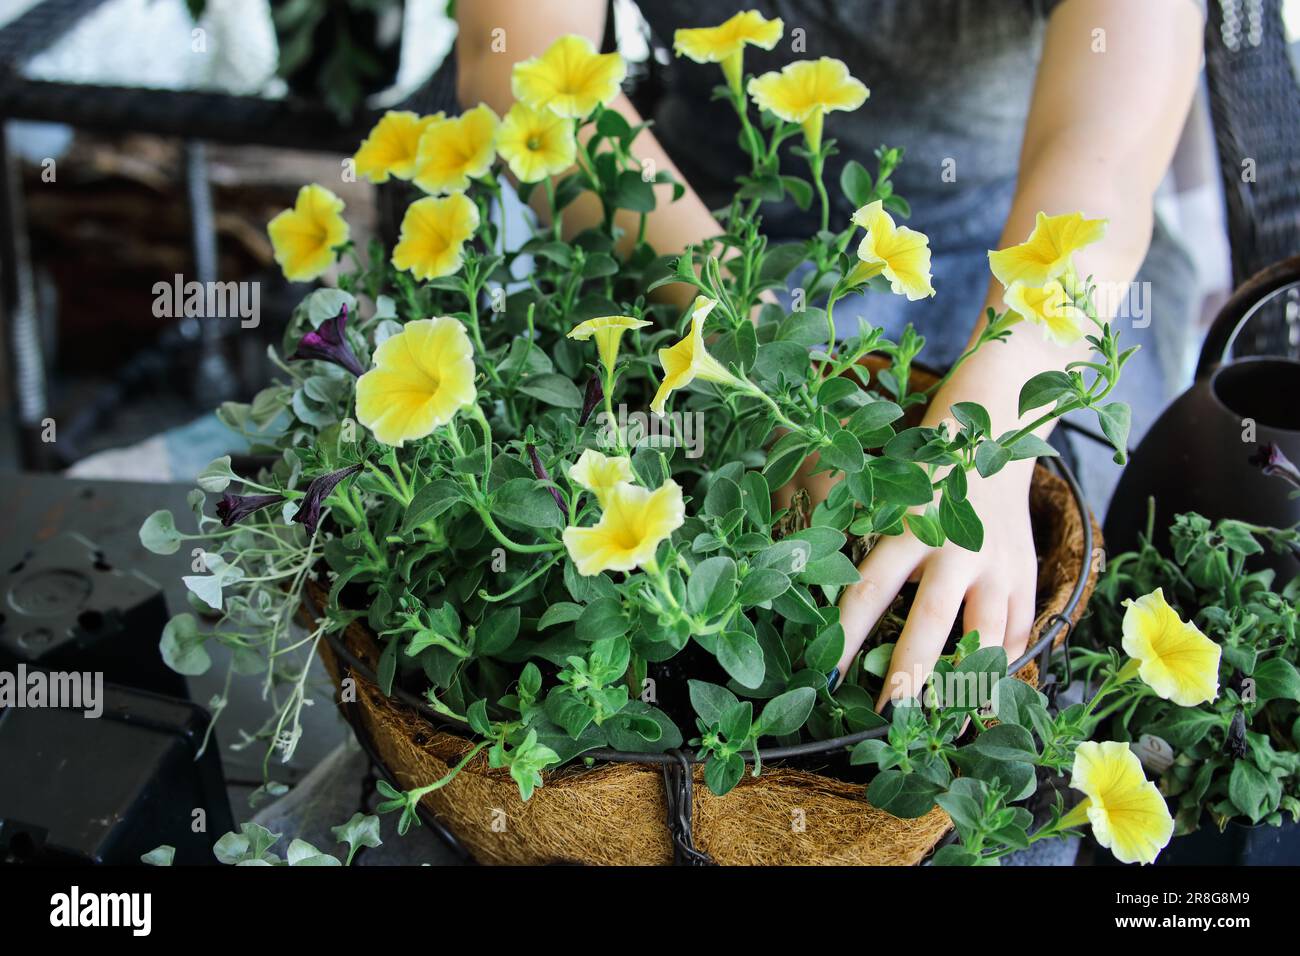 Young woman planting a mixed annual hanging basket or pot of flowers. Flowers include yellow and black petunias with dichondra. Stock Photo